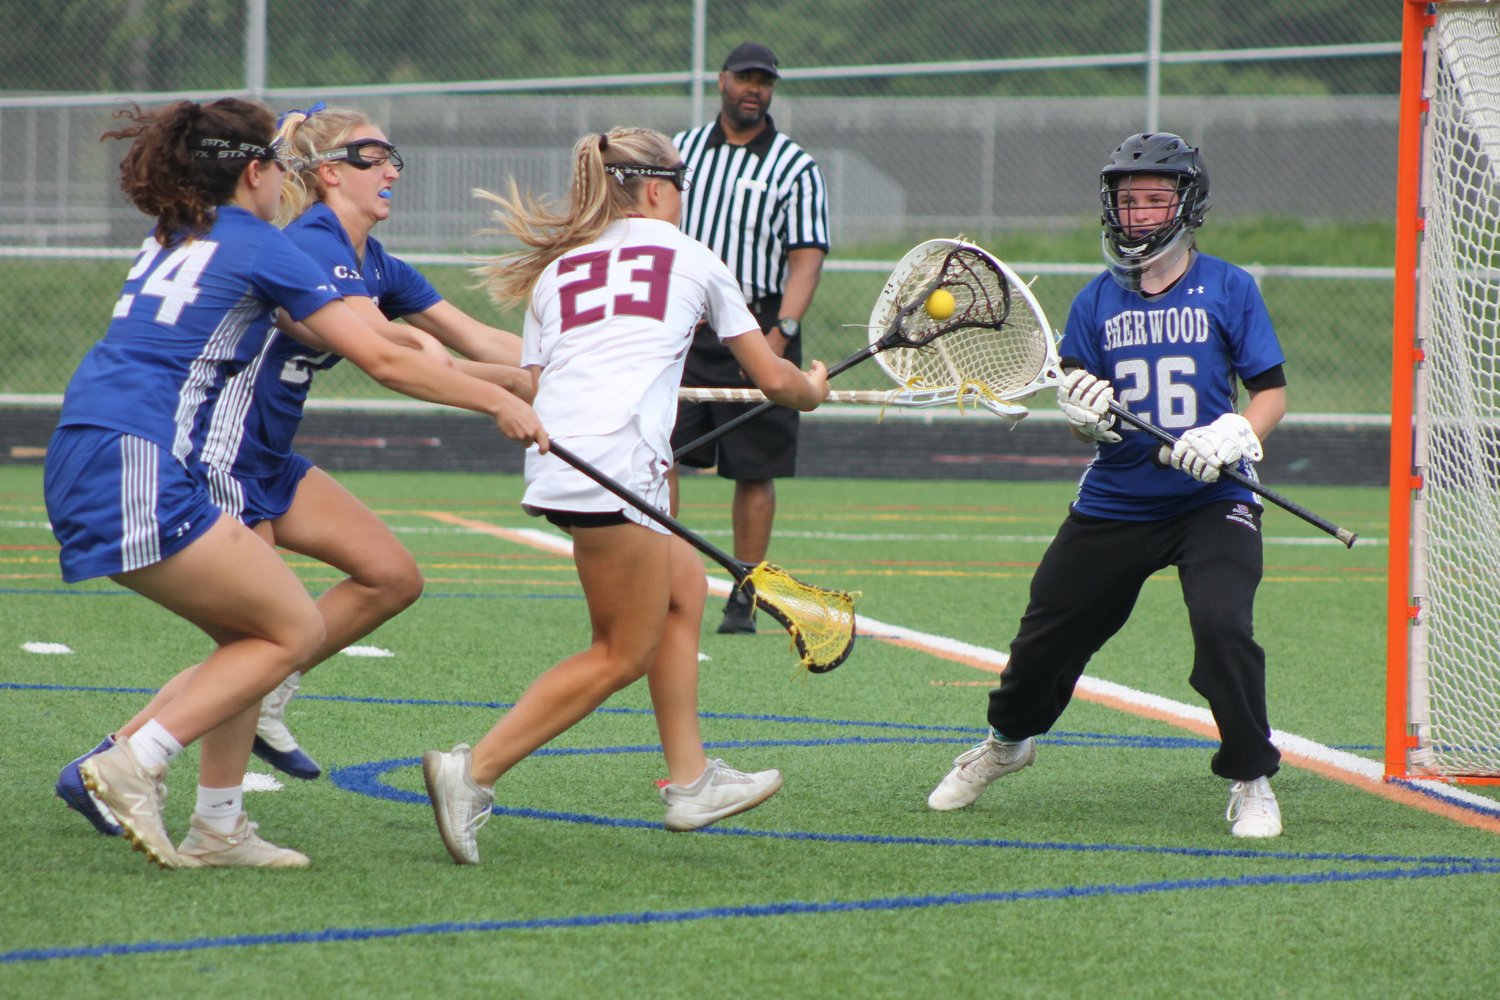 Lilly Kelley attempted a shot on goal, but she was denied on this attempt by a great save from Sherwood’s goalie, Savannah Weisman.